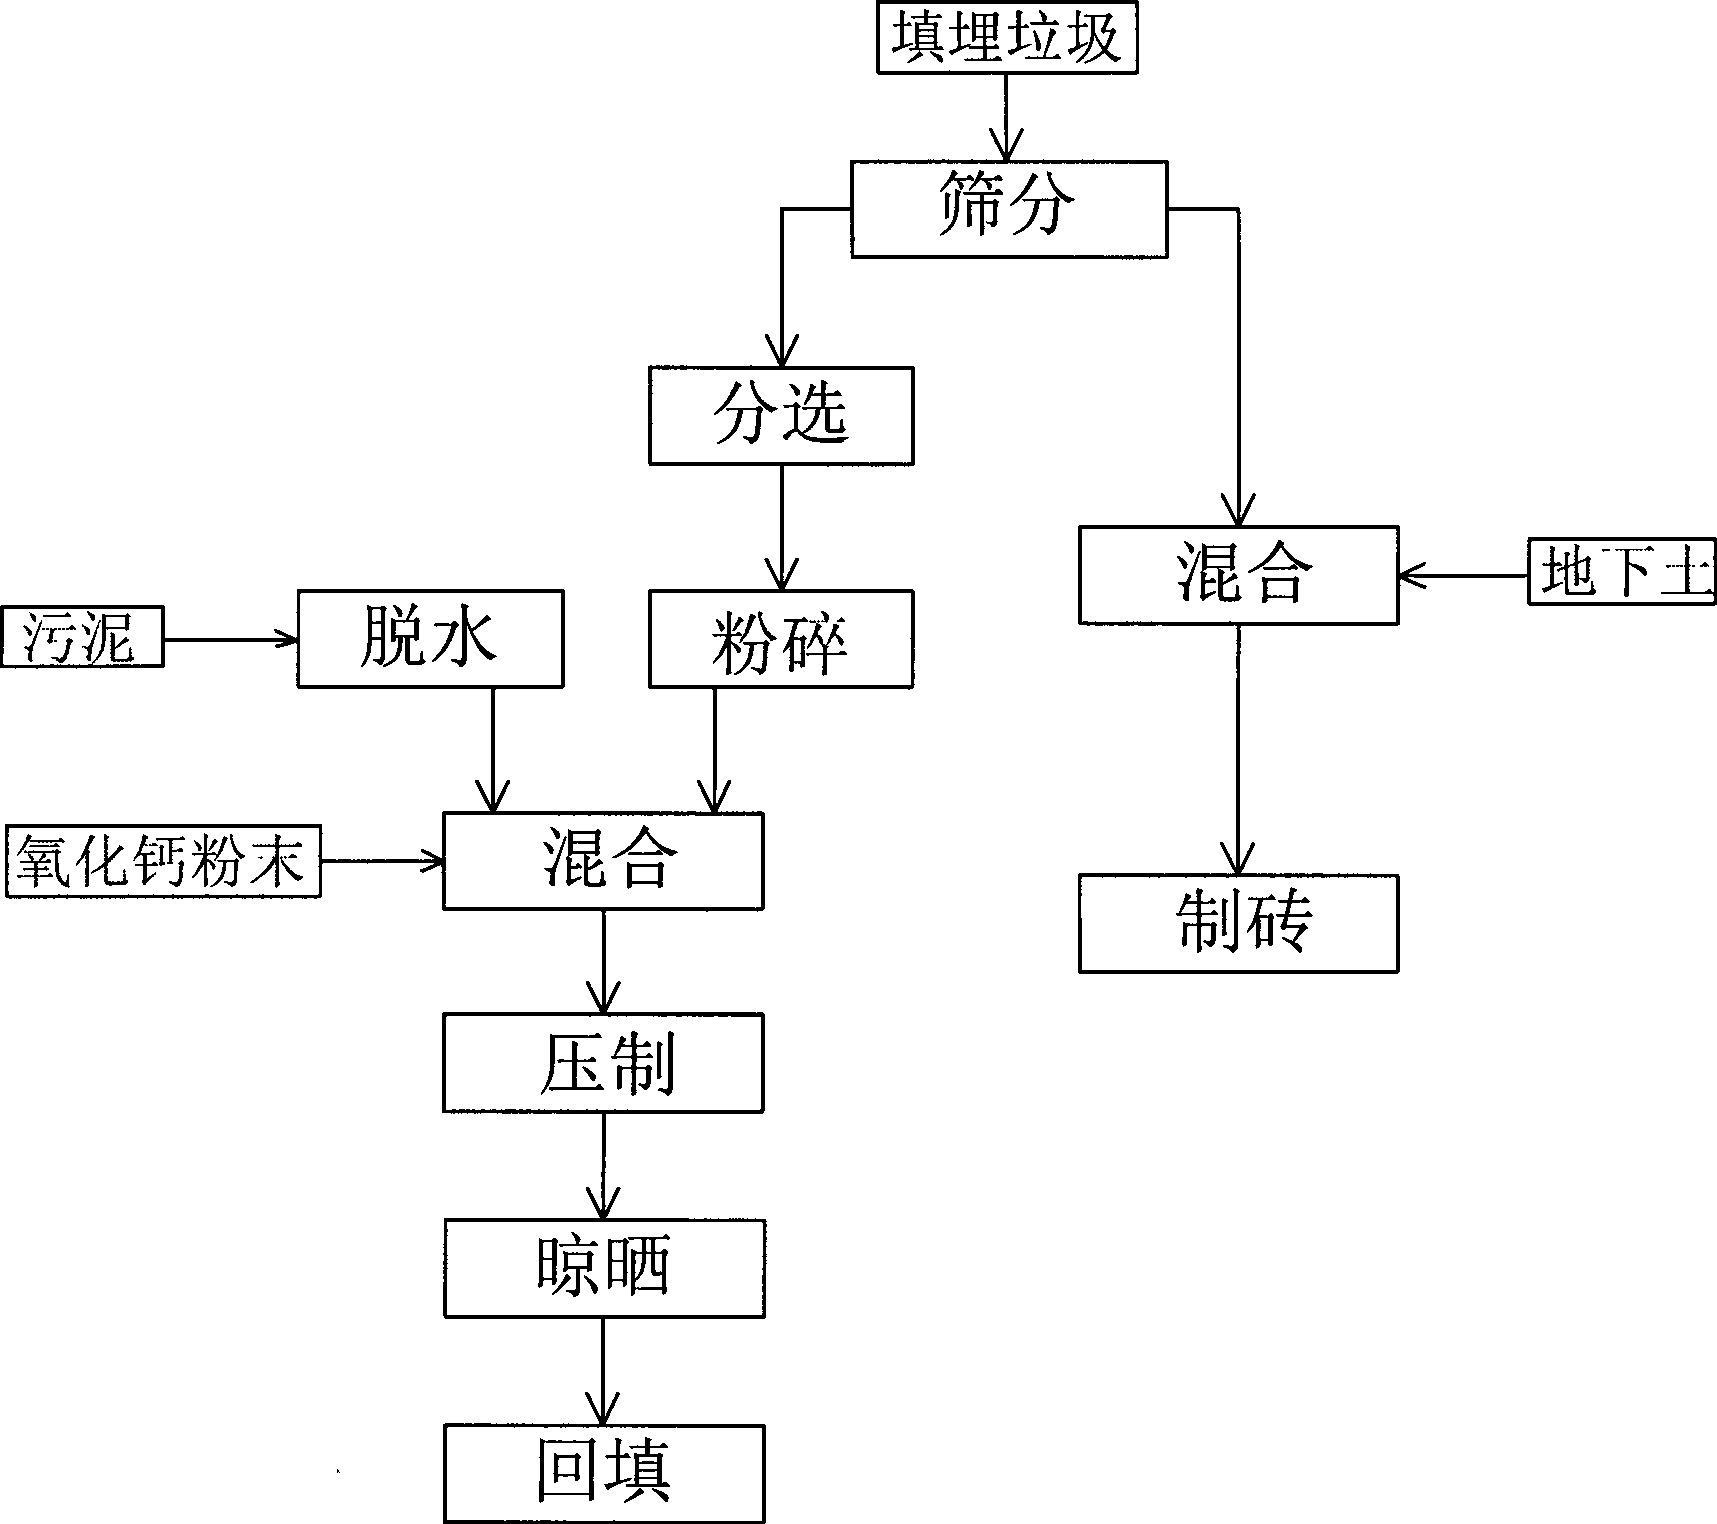 Comprehensive exploitation system and method for refuse dump